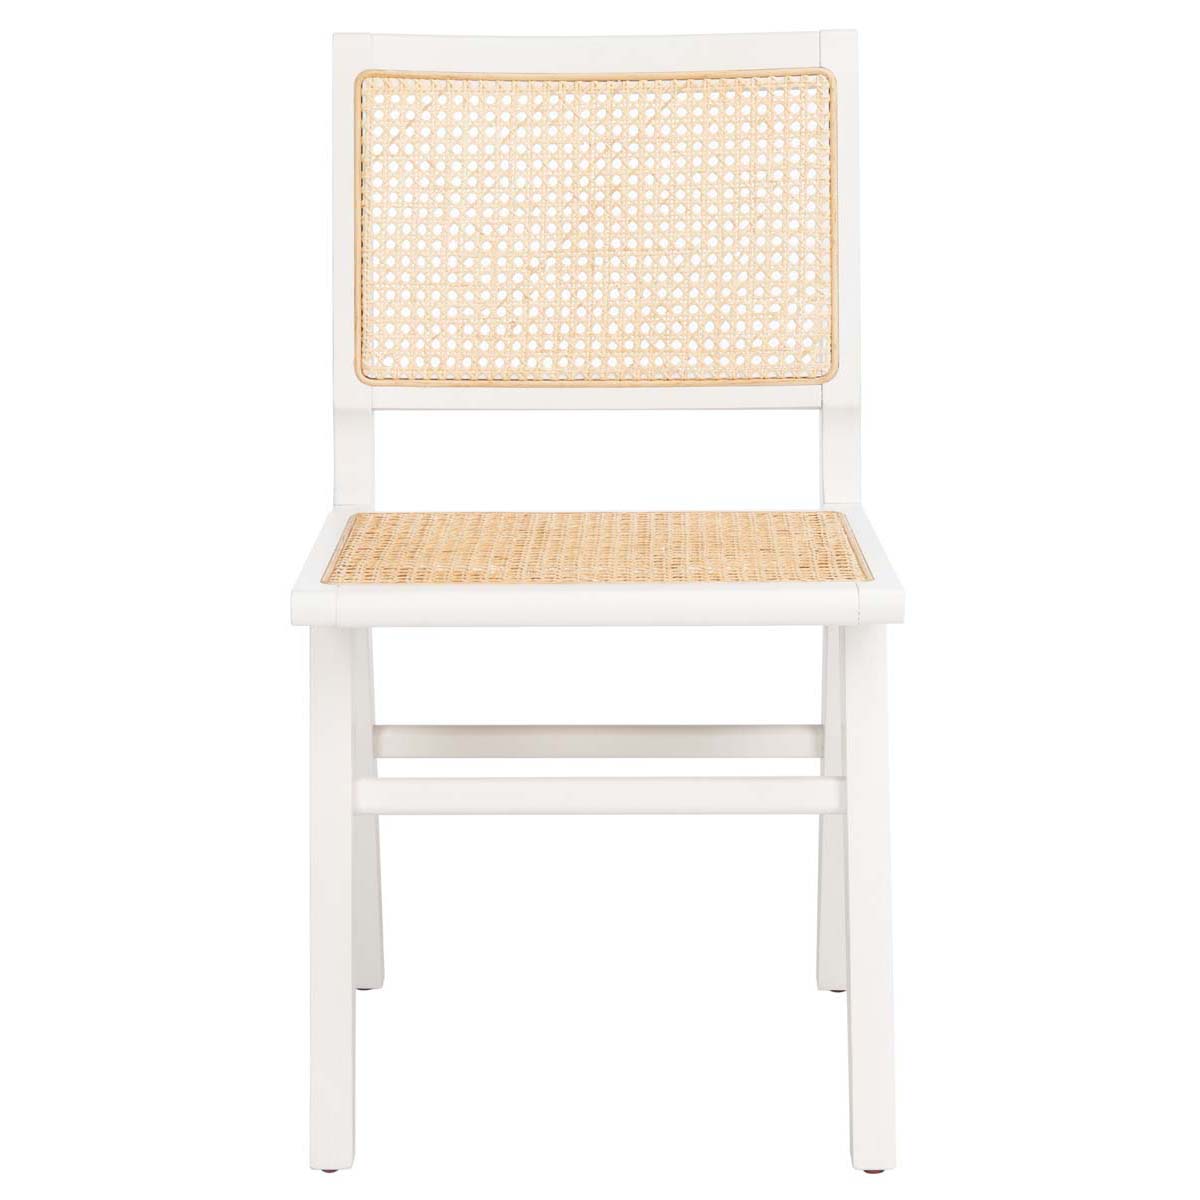 Safavieh Couture Hattie French Cane Dining Chair (Set of 2) - White / Natural